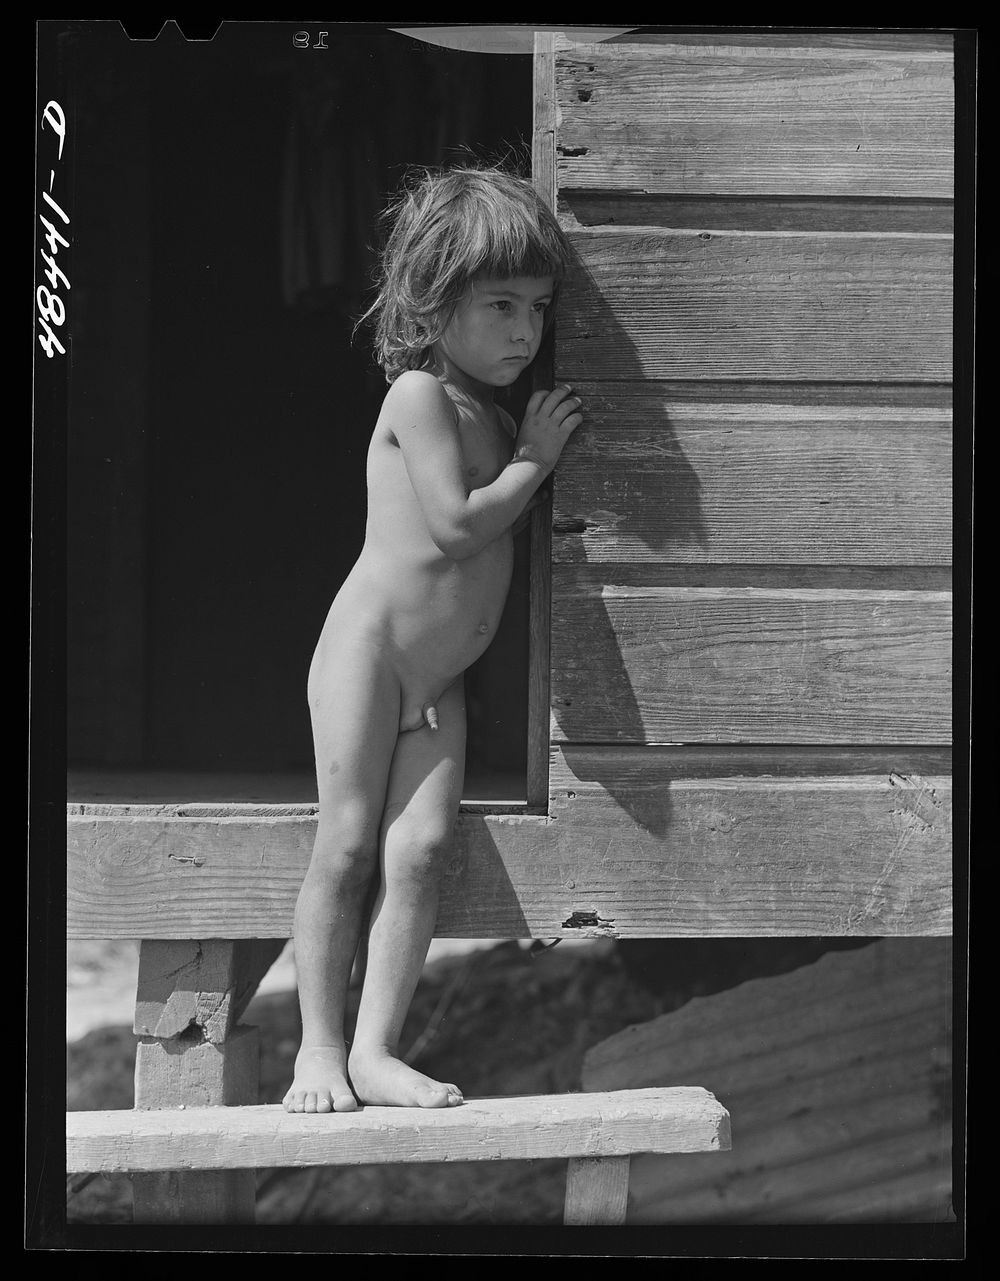 [Untitled photo, possibly related to: Rio Piedras (vicinity), Puerto Rico. One of the children of a FSA (Farm Security…